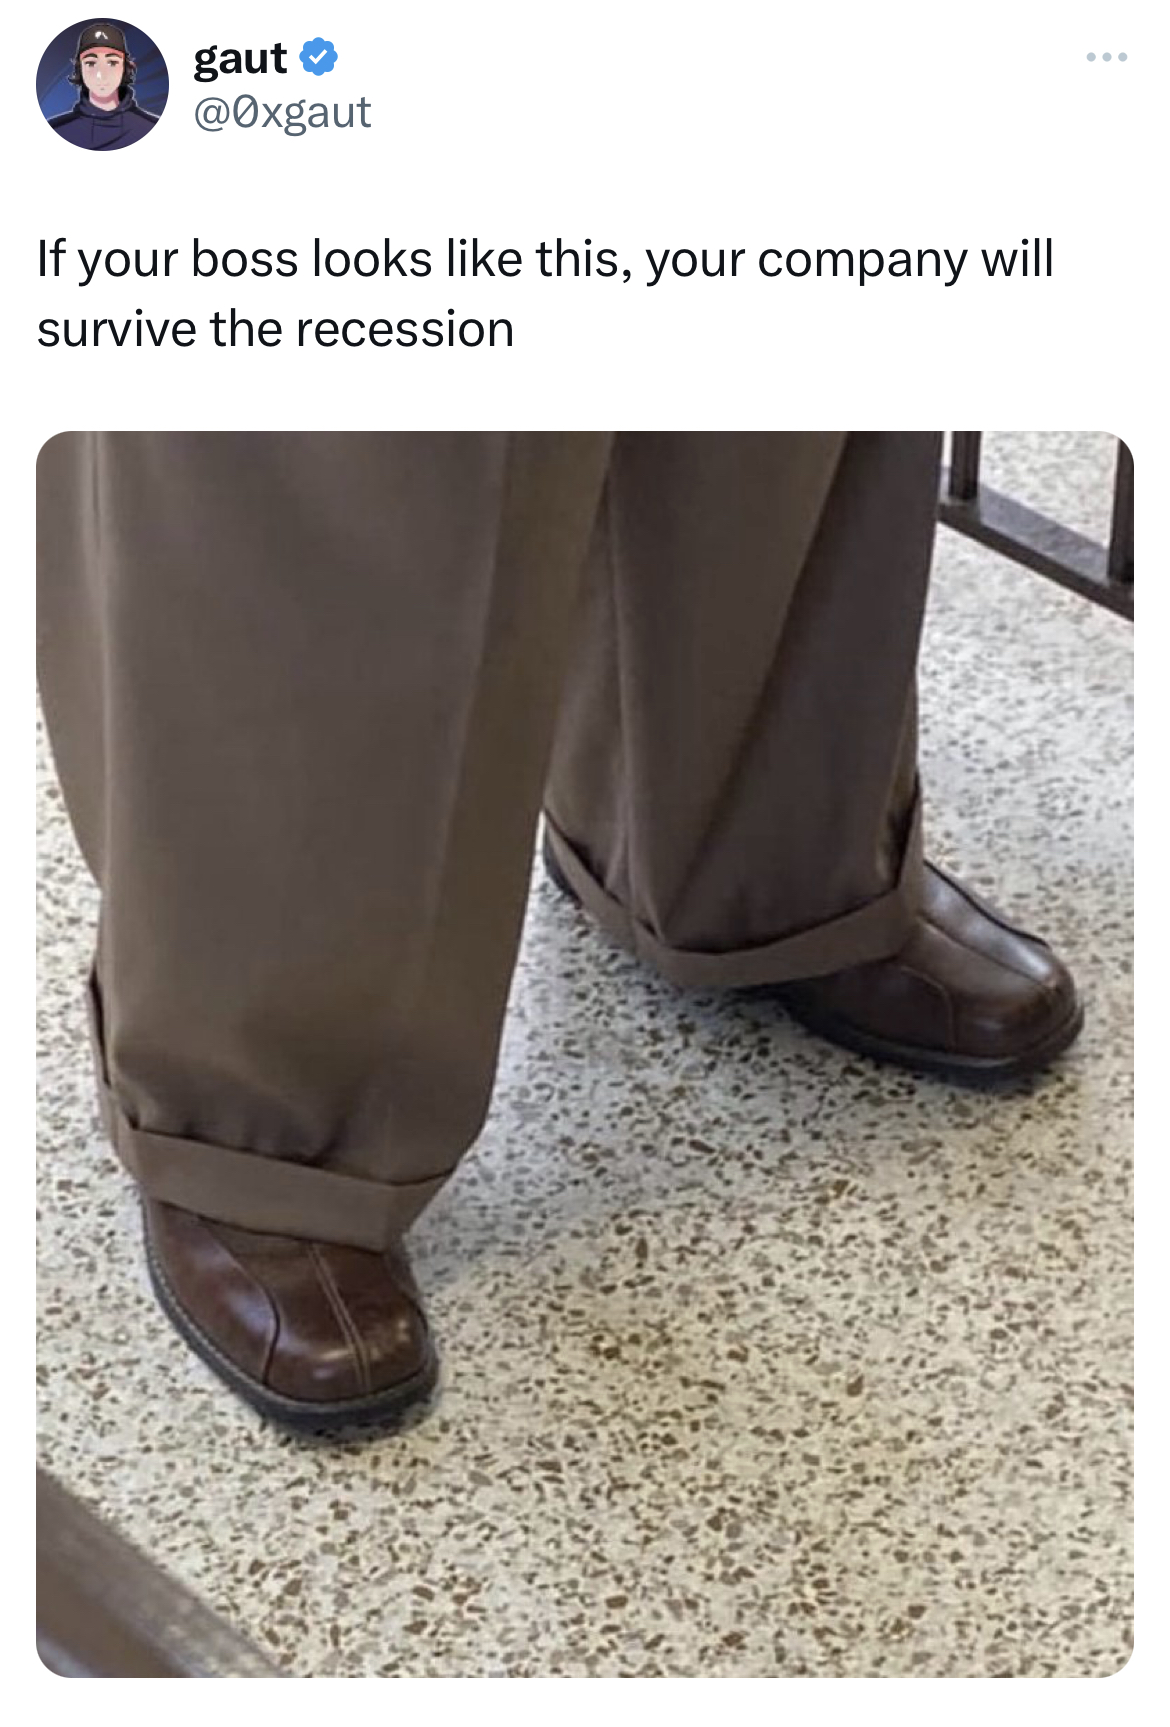 Savage and Unhinged tweets if your lawyers pants look like - gaut If your boss looks this, your company will survive the recession